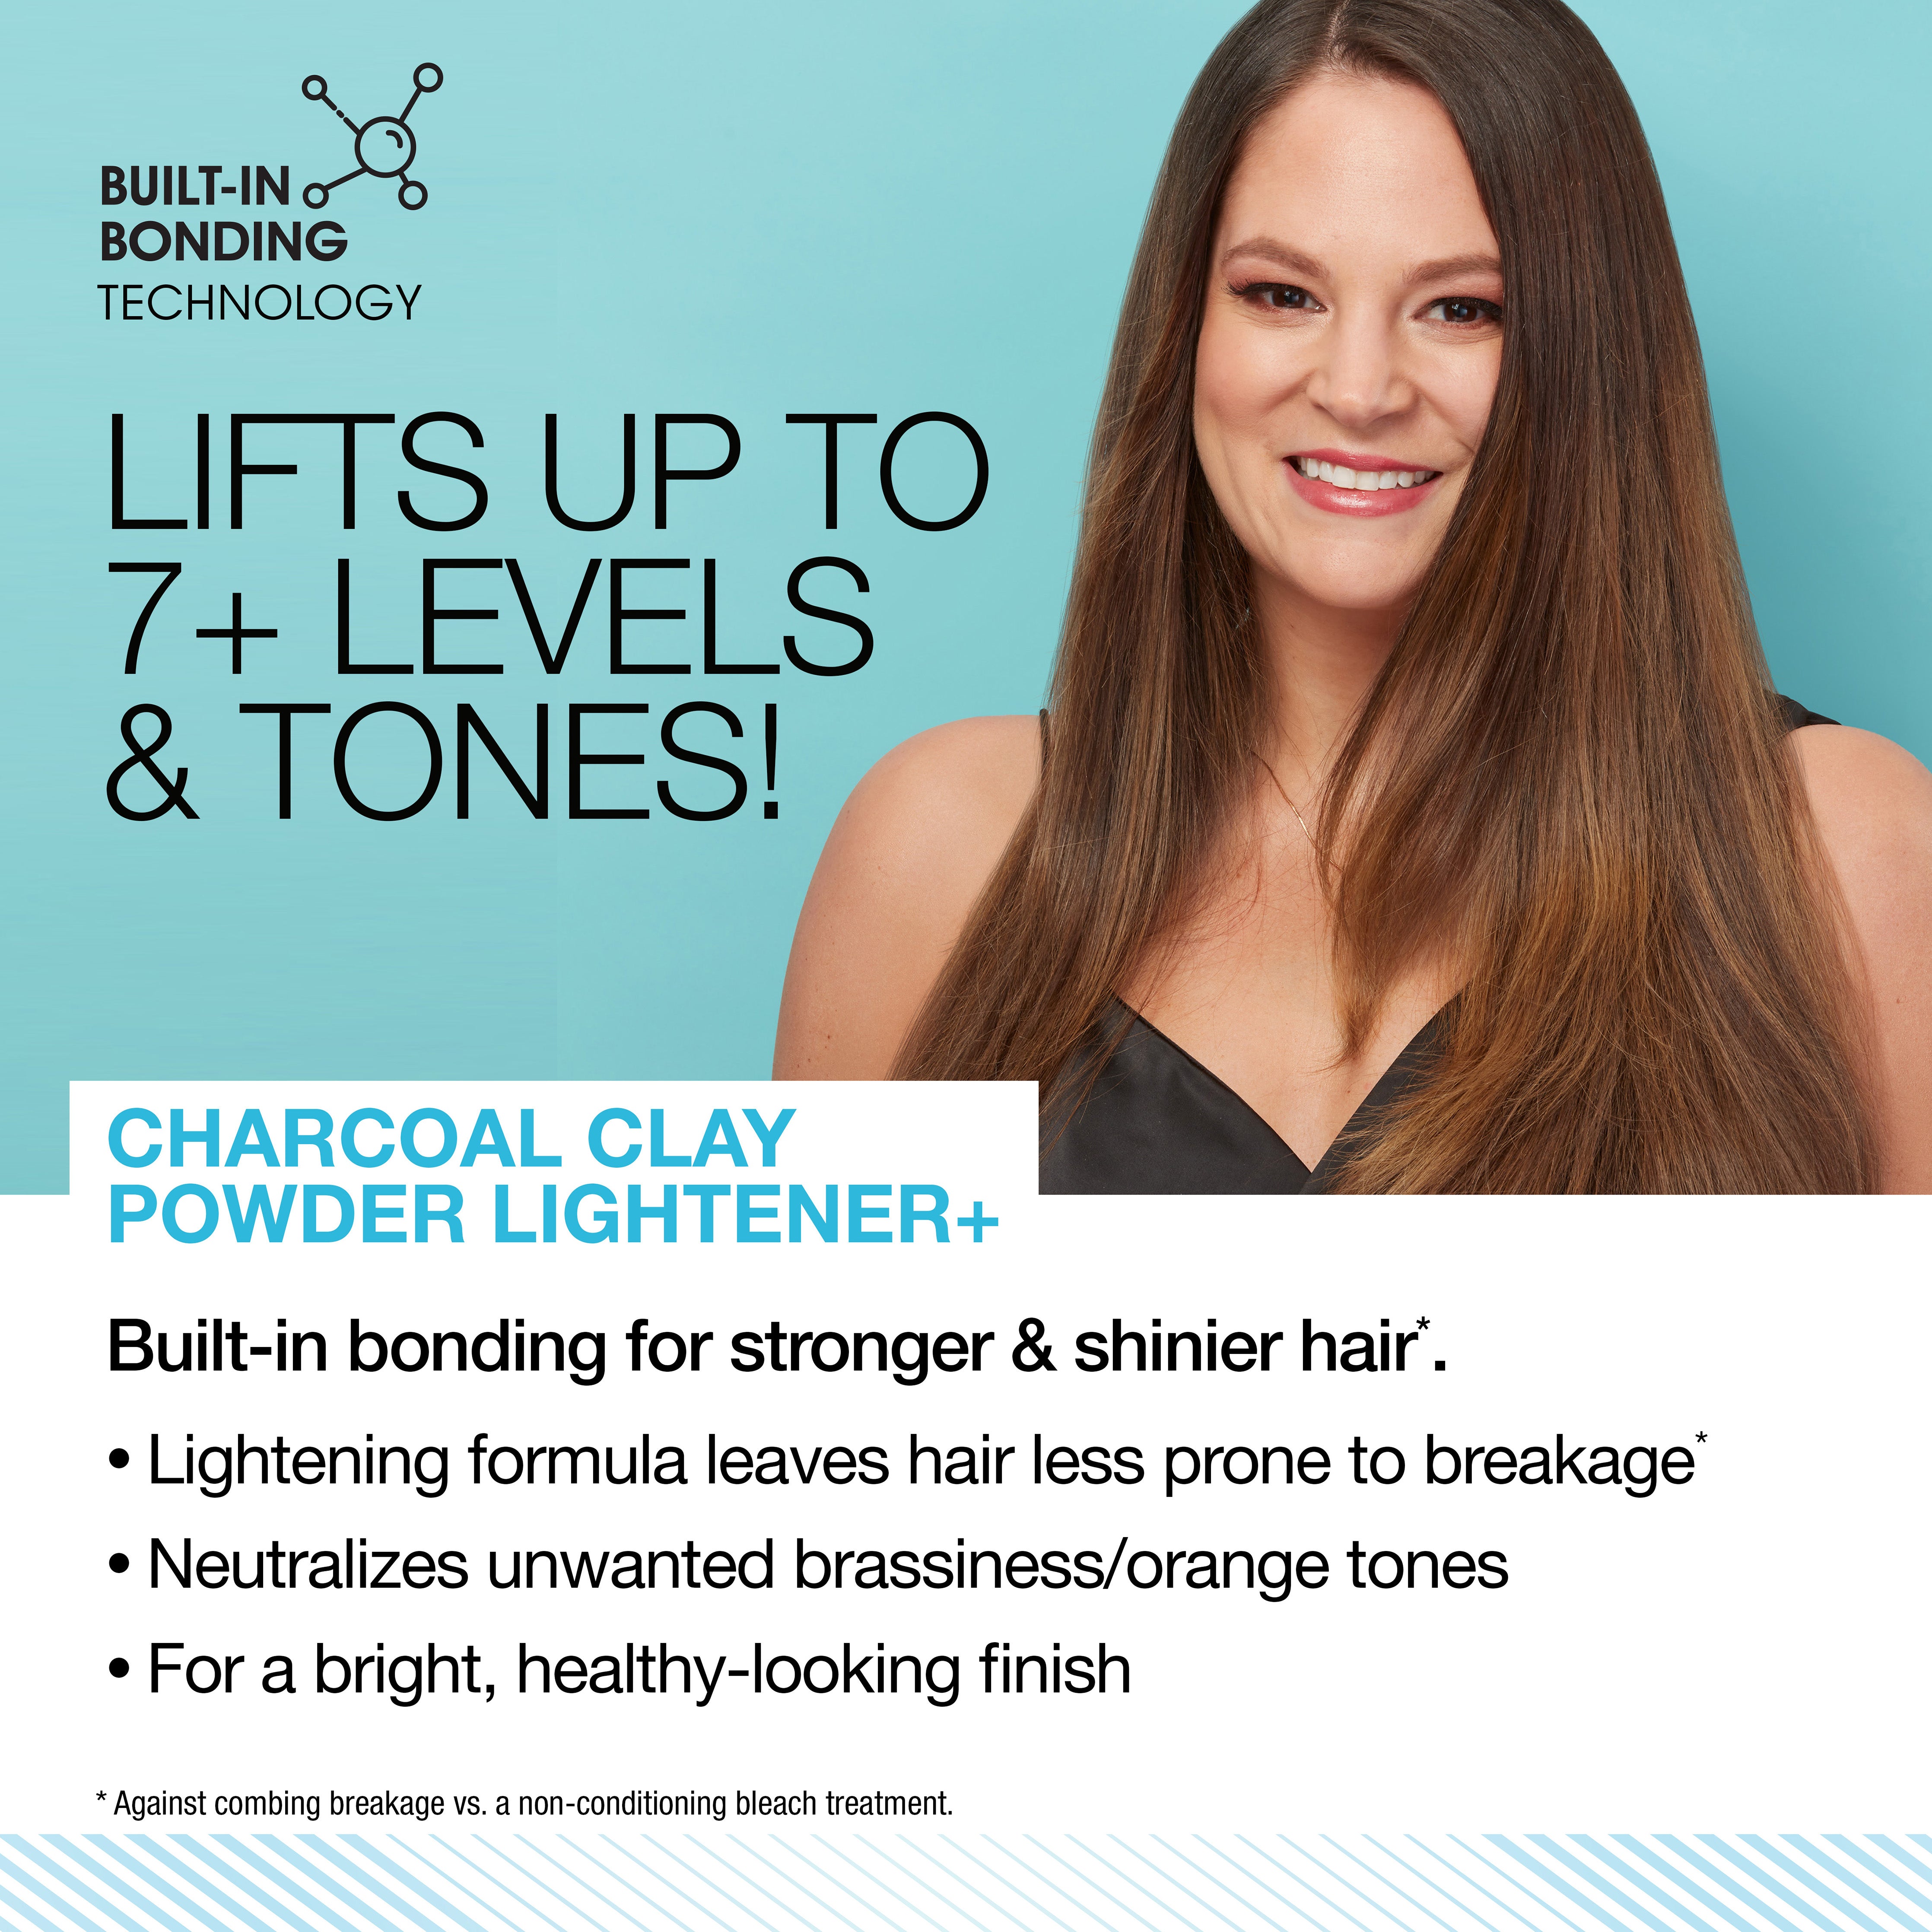 Lifts up to 7+ levels and tones. Built-in bonding for stronger and shinier hair. Lightening formula leaves hair less prone to breakage (against combining breakage vs. a non-conditioning bleach treatment). Neutralizes unwanted brassiness/orange. 